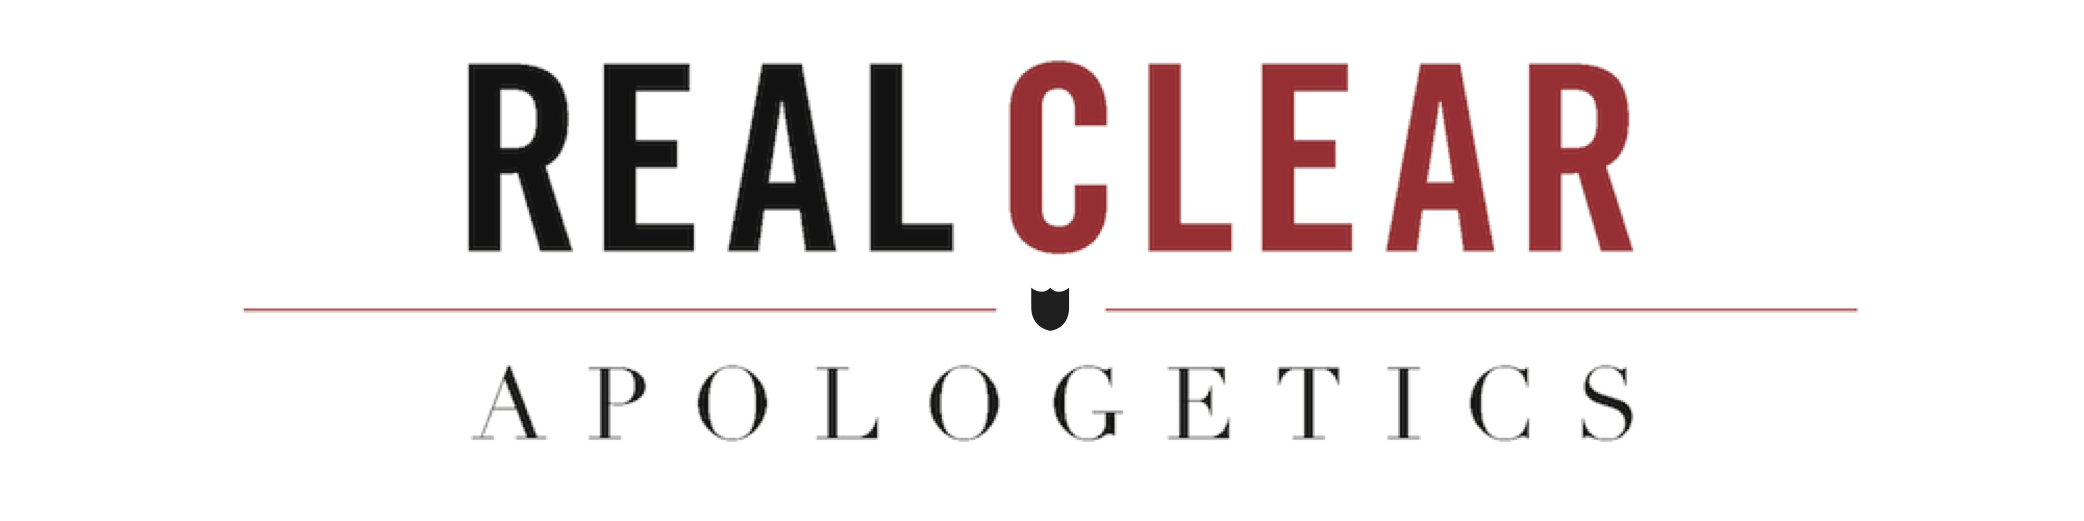 Real Clear Apologetics